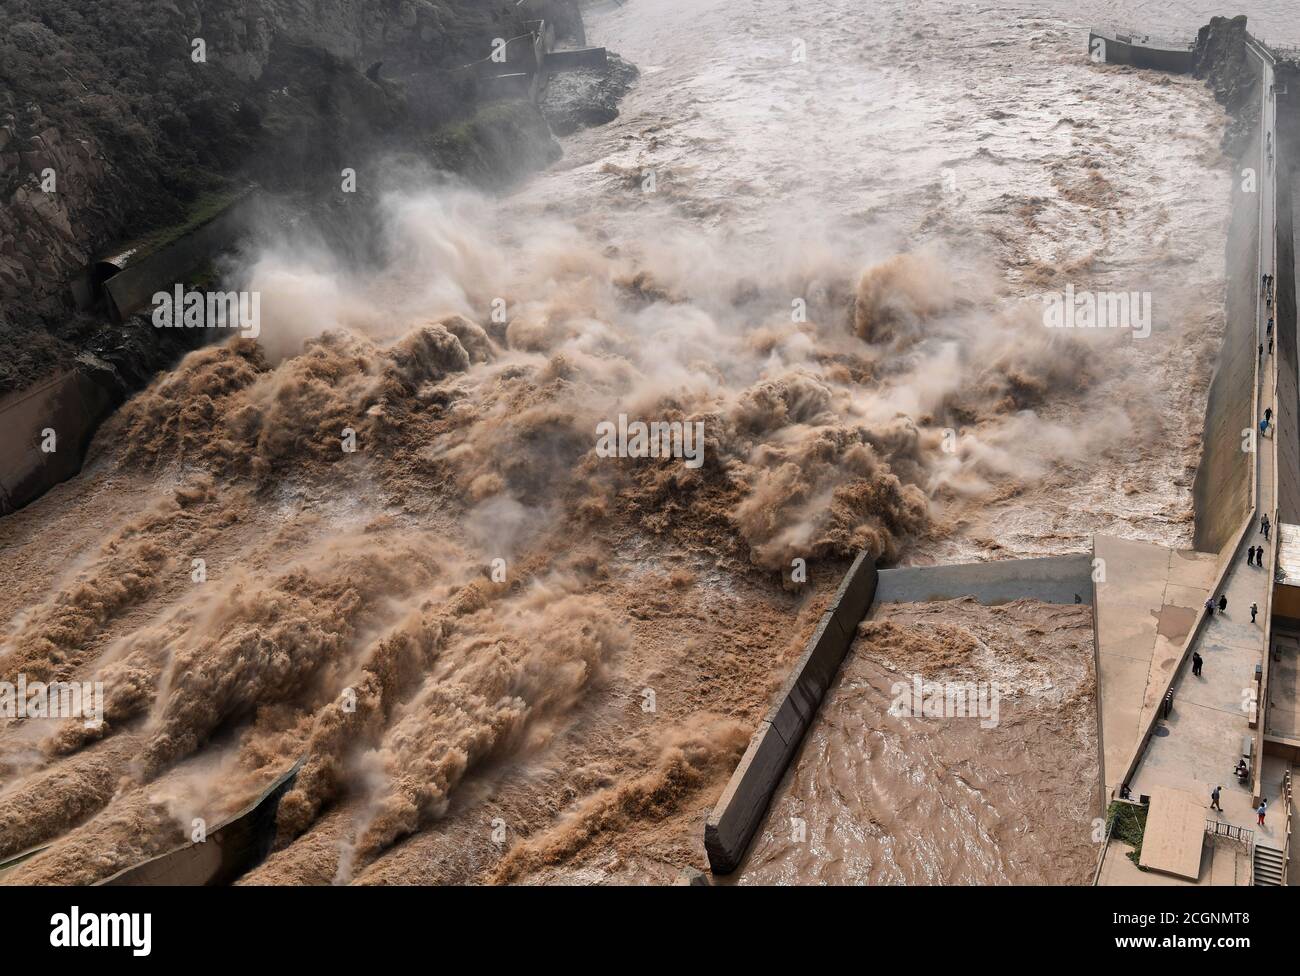 Sanmenxia. 11th Sep, 2020. Photo taken on Sept. 11, 2020 shows the Sanmenxia water control project in central China's Henan Province. Credit: Hao Yuan/Xinhua/Alamy Live News Stock Photo